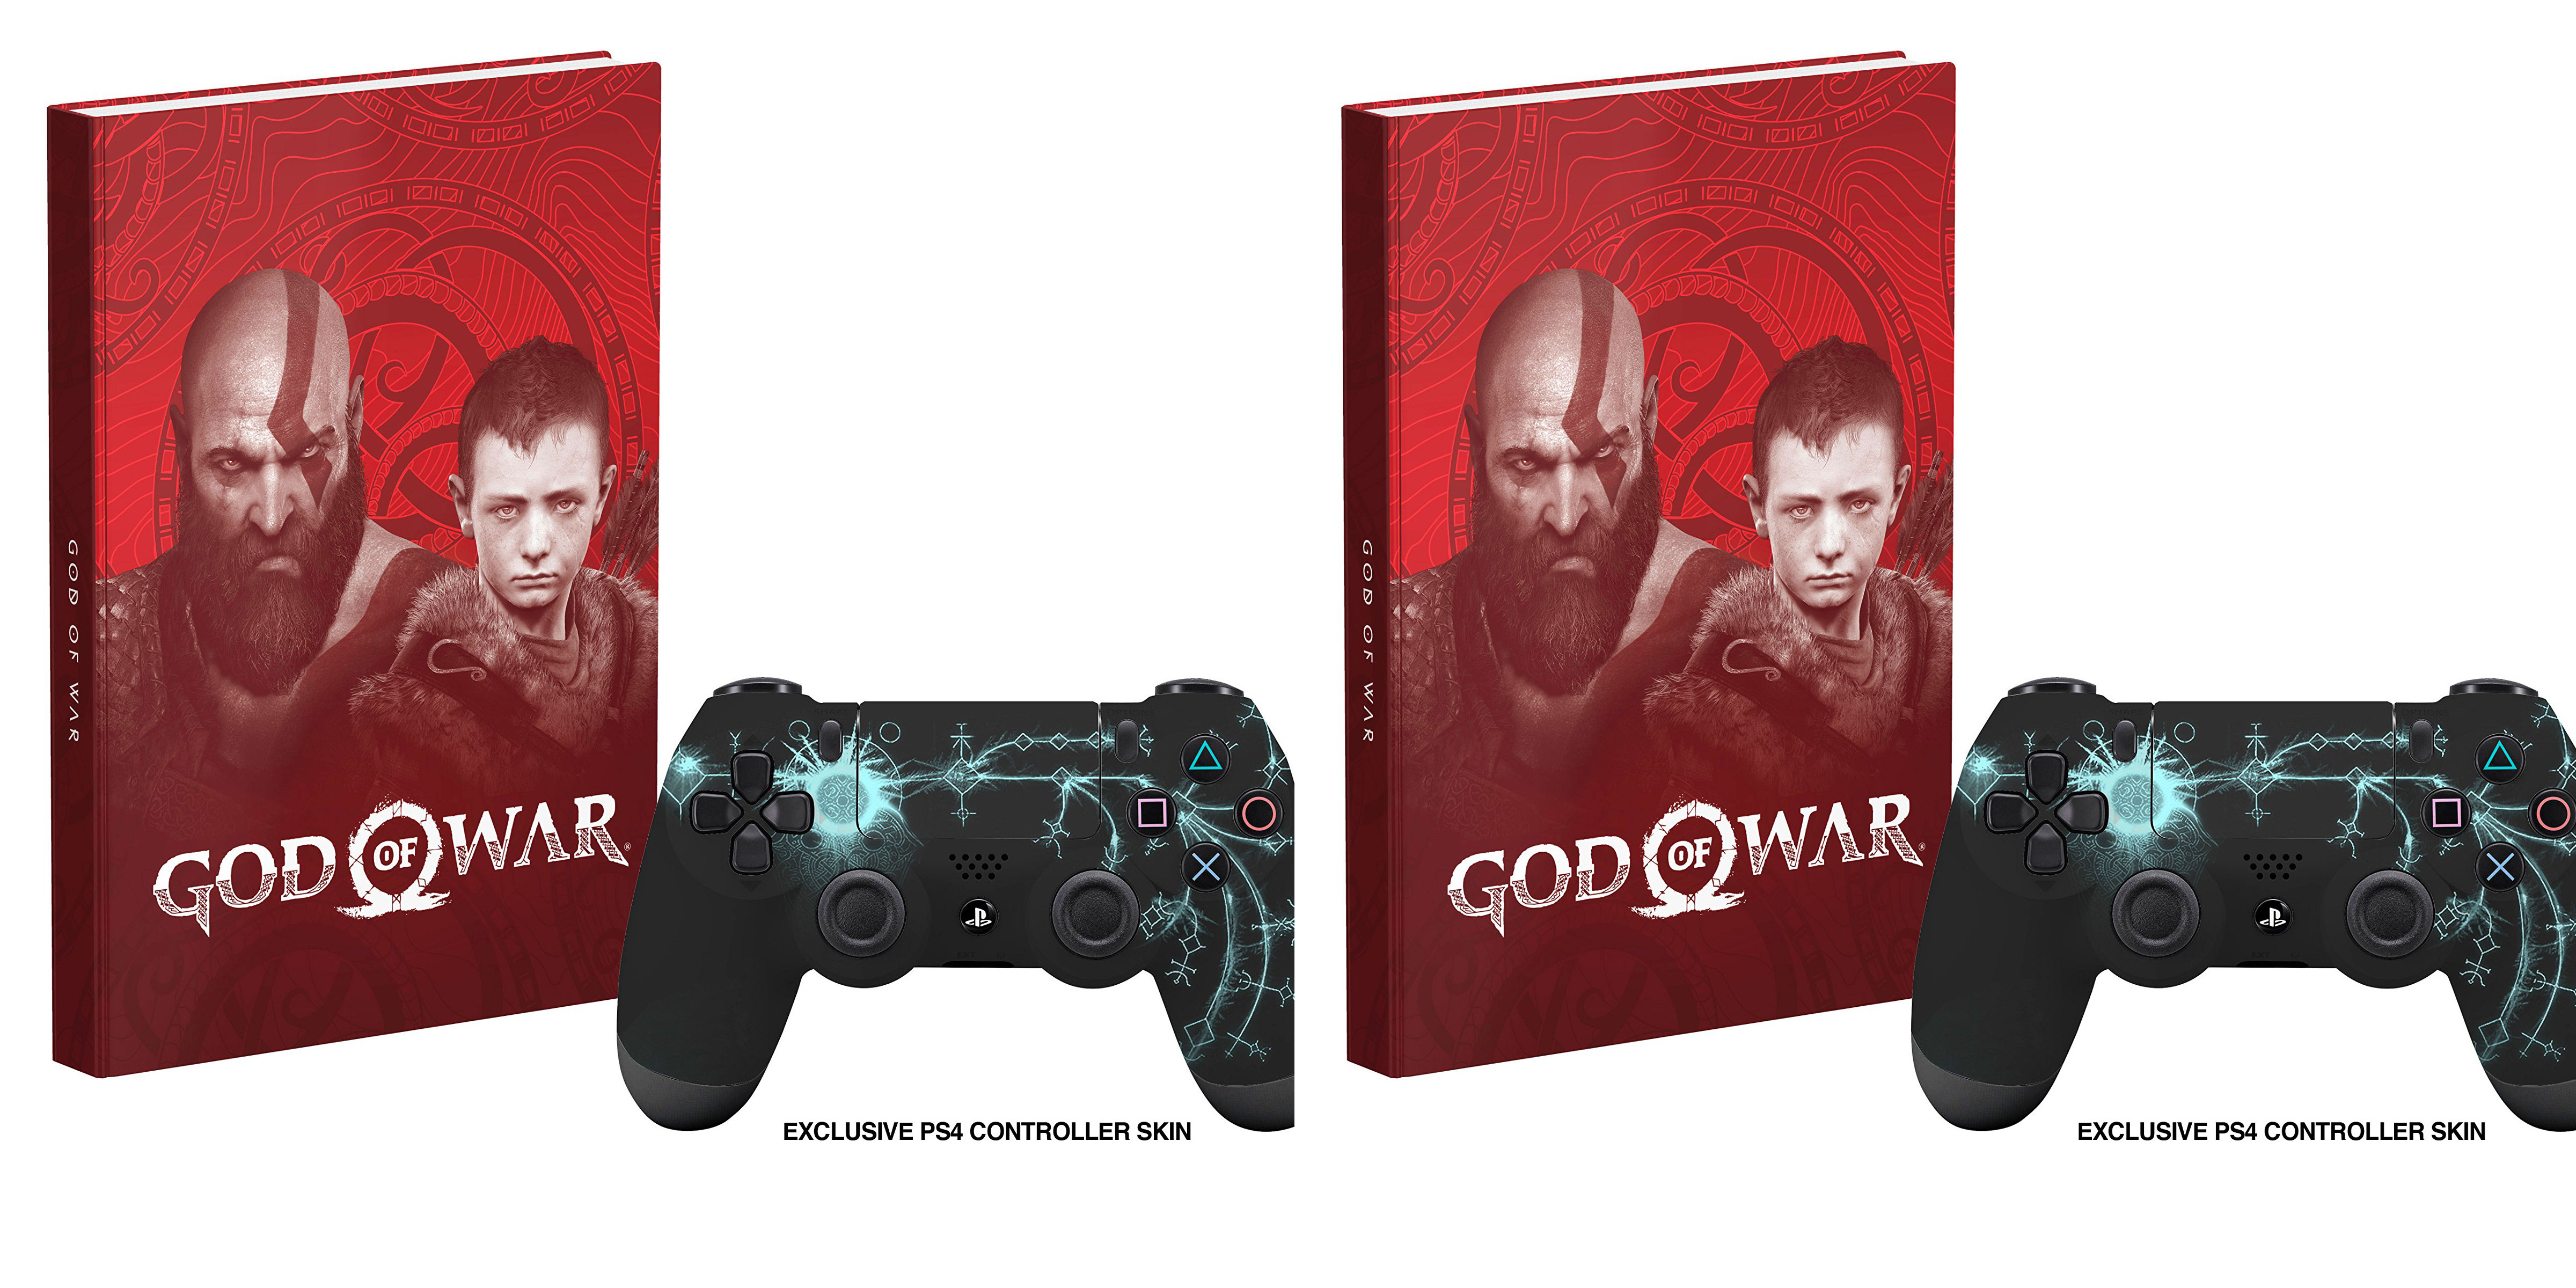 God of War hardcover Collector's Edition + PS4 controller skin: $24 $40)